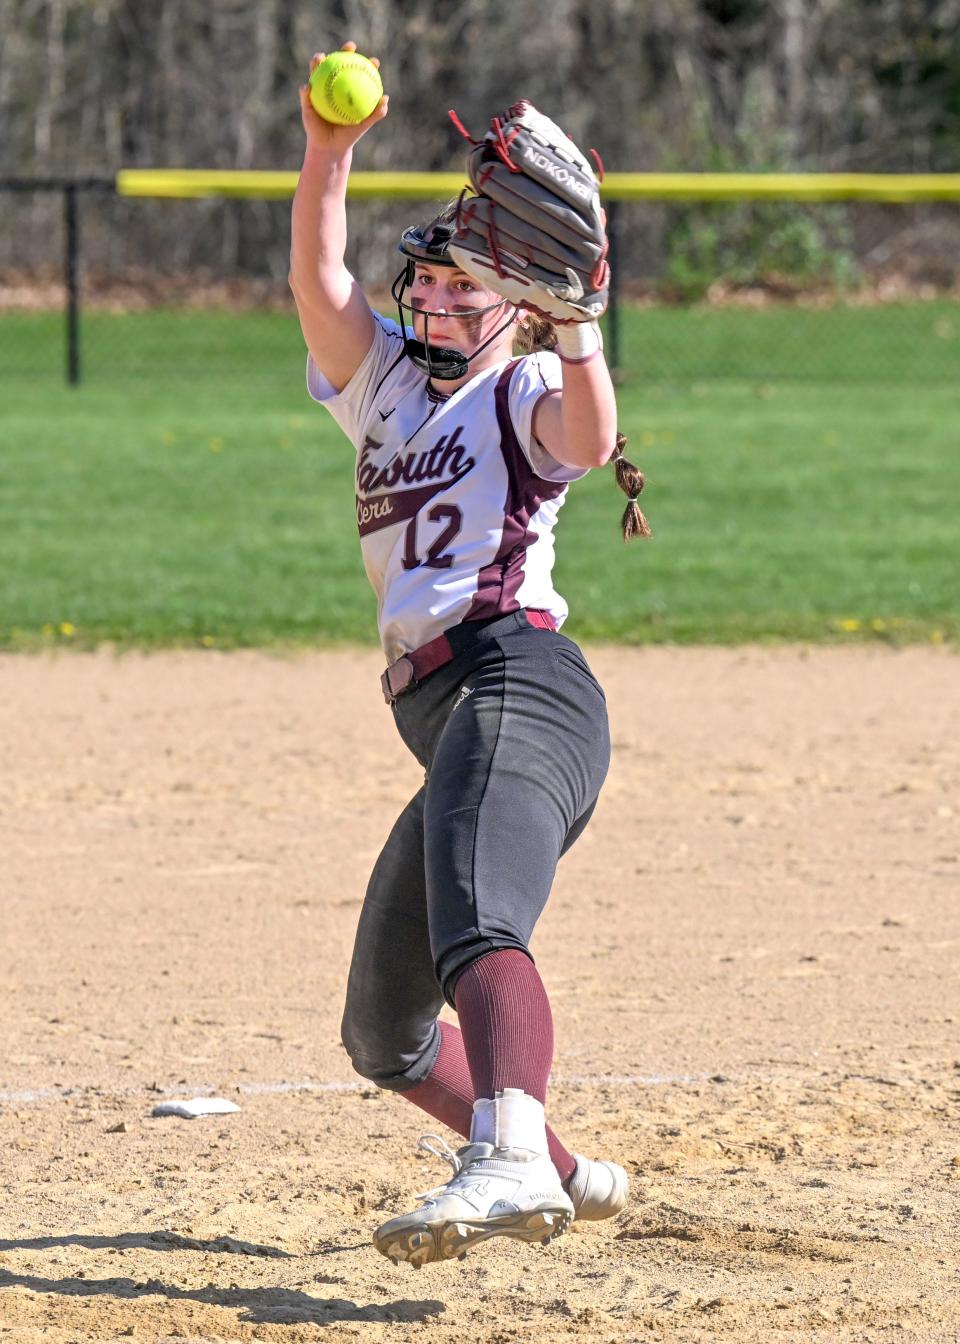 Falmouth starter Rylin Briggs winds up to throw against Barnstable.